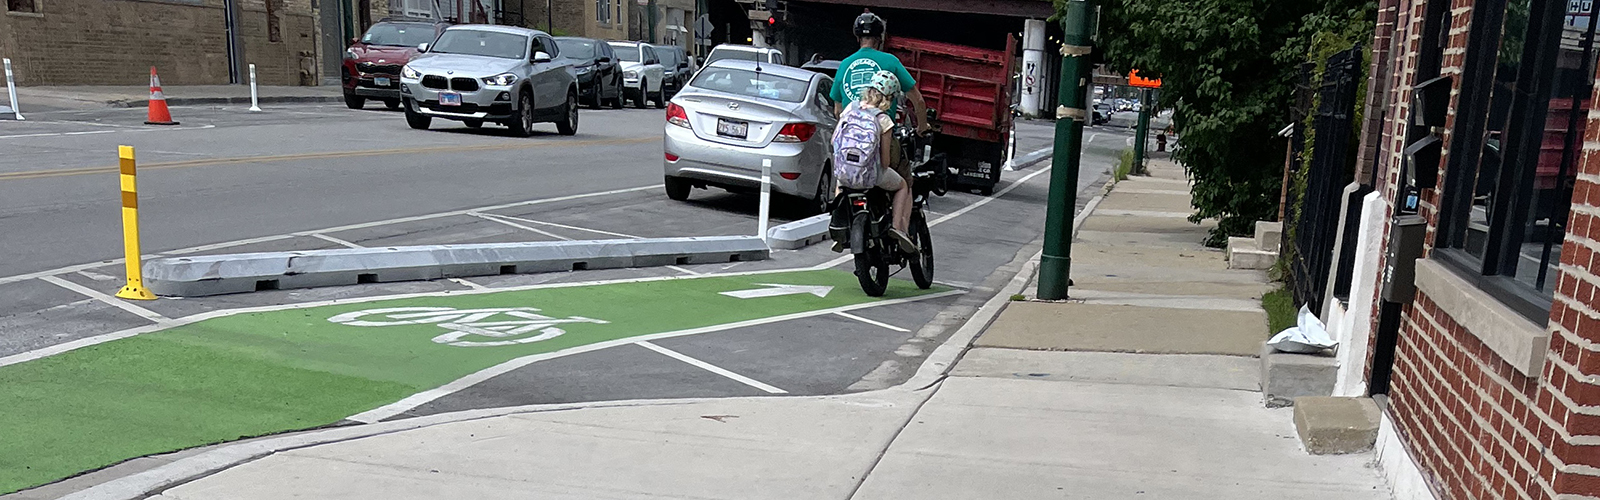 An adult and child ride a bike in a bike lane between the curb a parking lane with concrete barrier separation